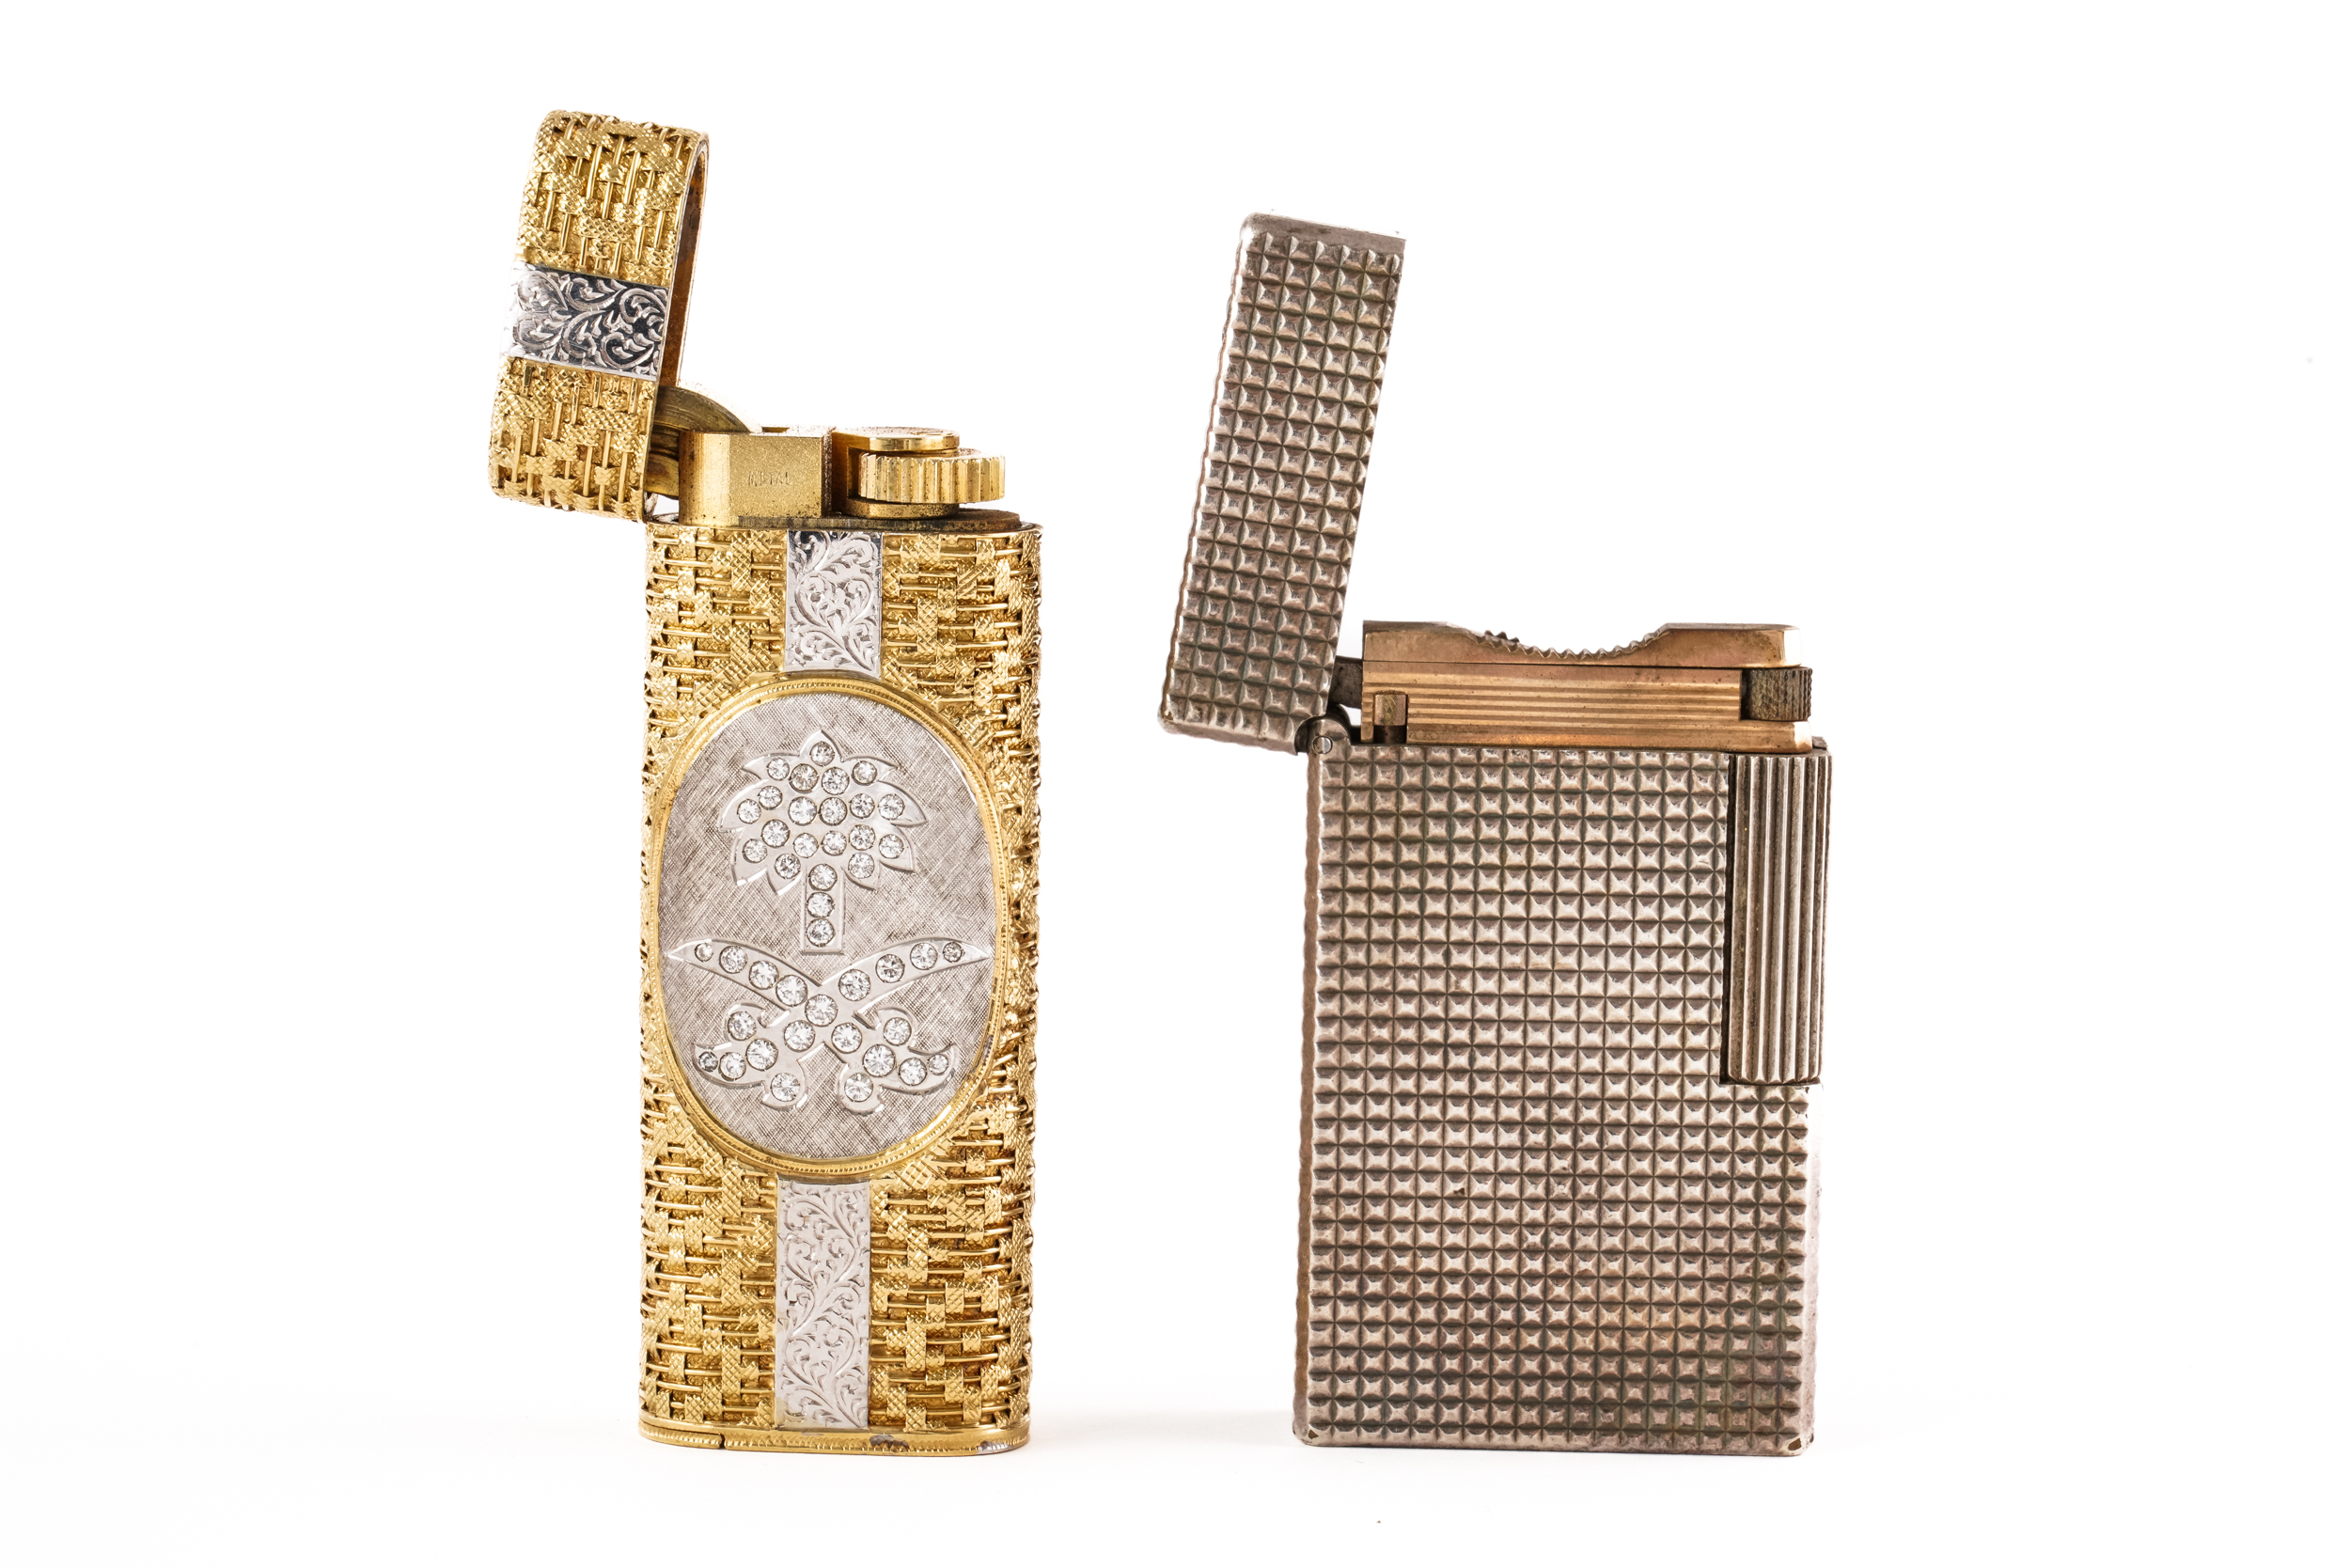 A GOLD AND DIAMOND SET LIGHTER AND ANOTHER LIGHTER, BOTH BOXED (4) - Image 5 of 6